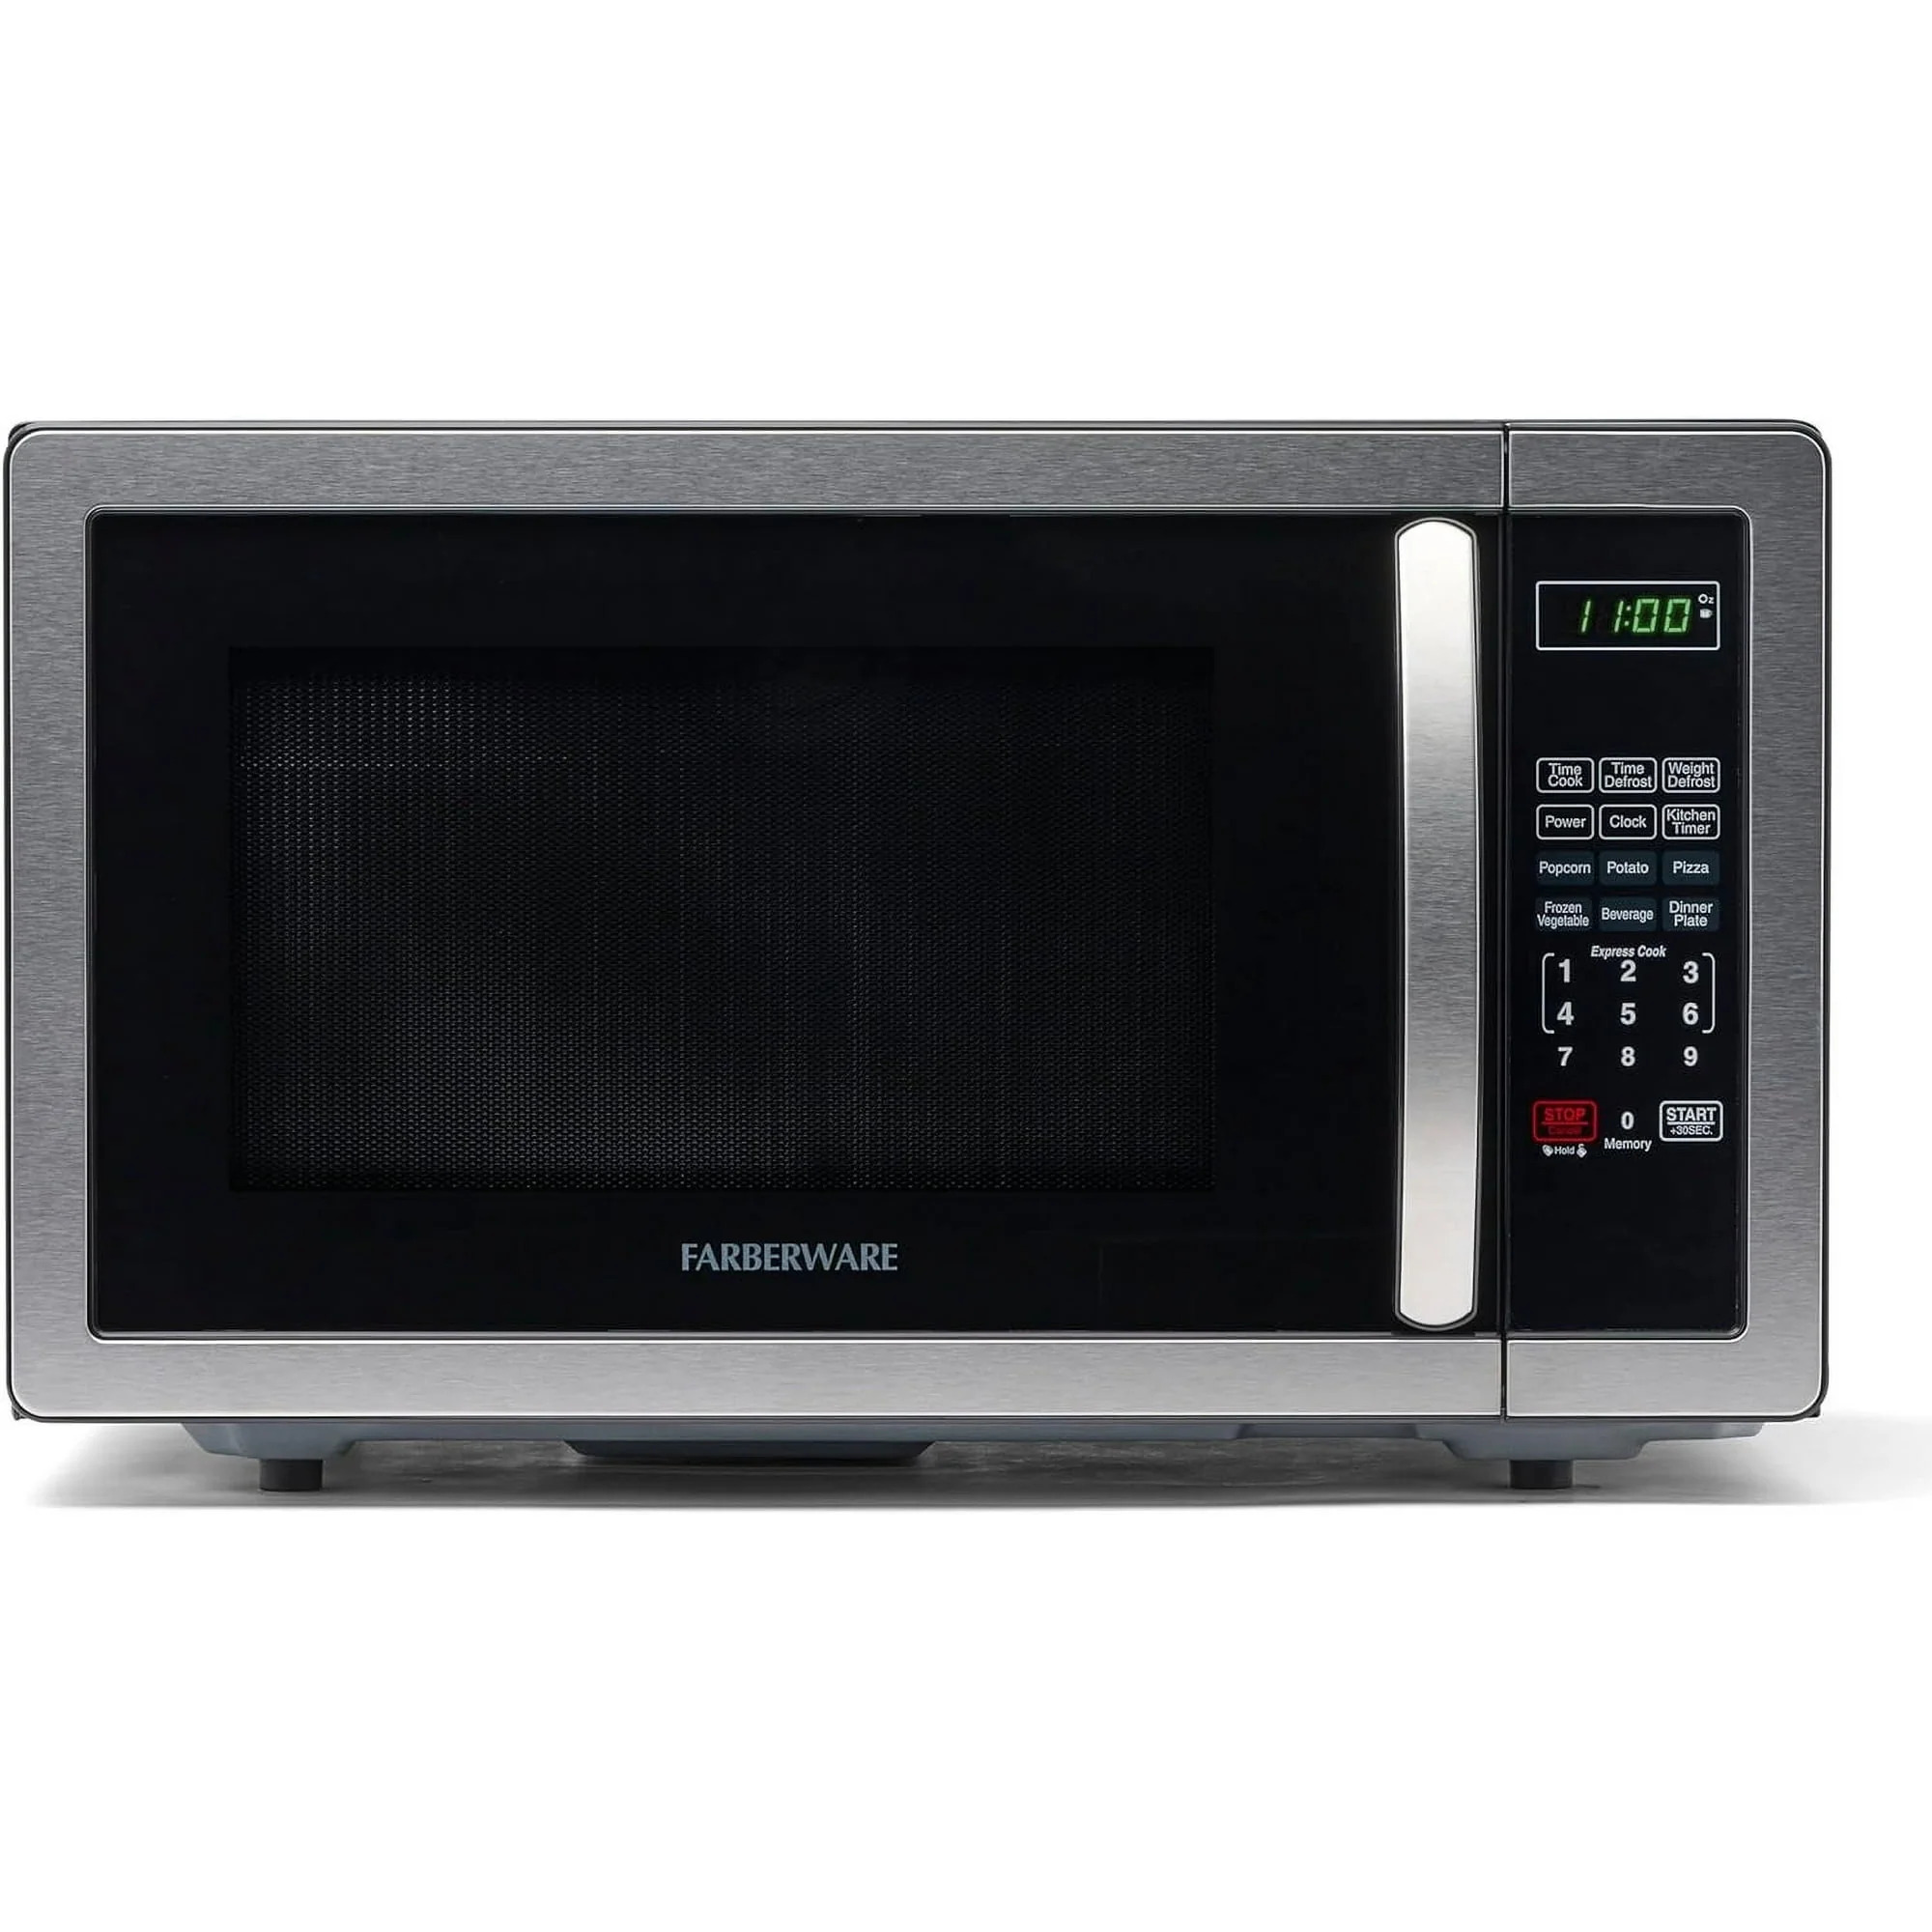 Farberware Stainless Steel Countertop Microwave Oven with Child Lock, 1.1 Cu Ft - image 1 of 7